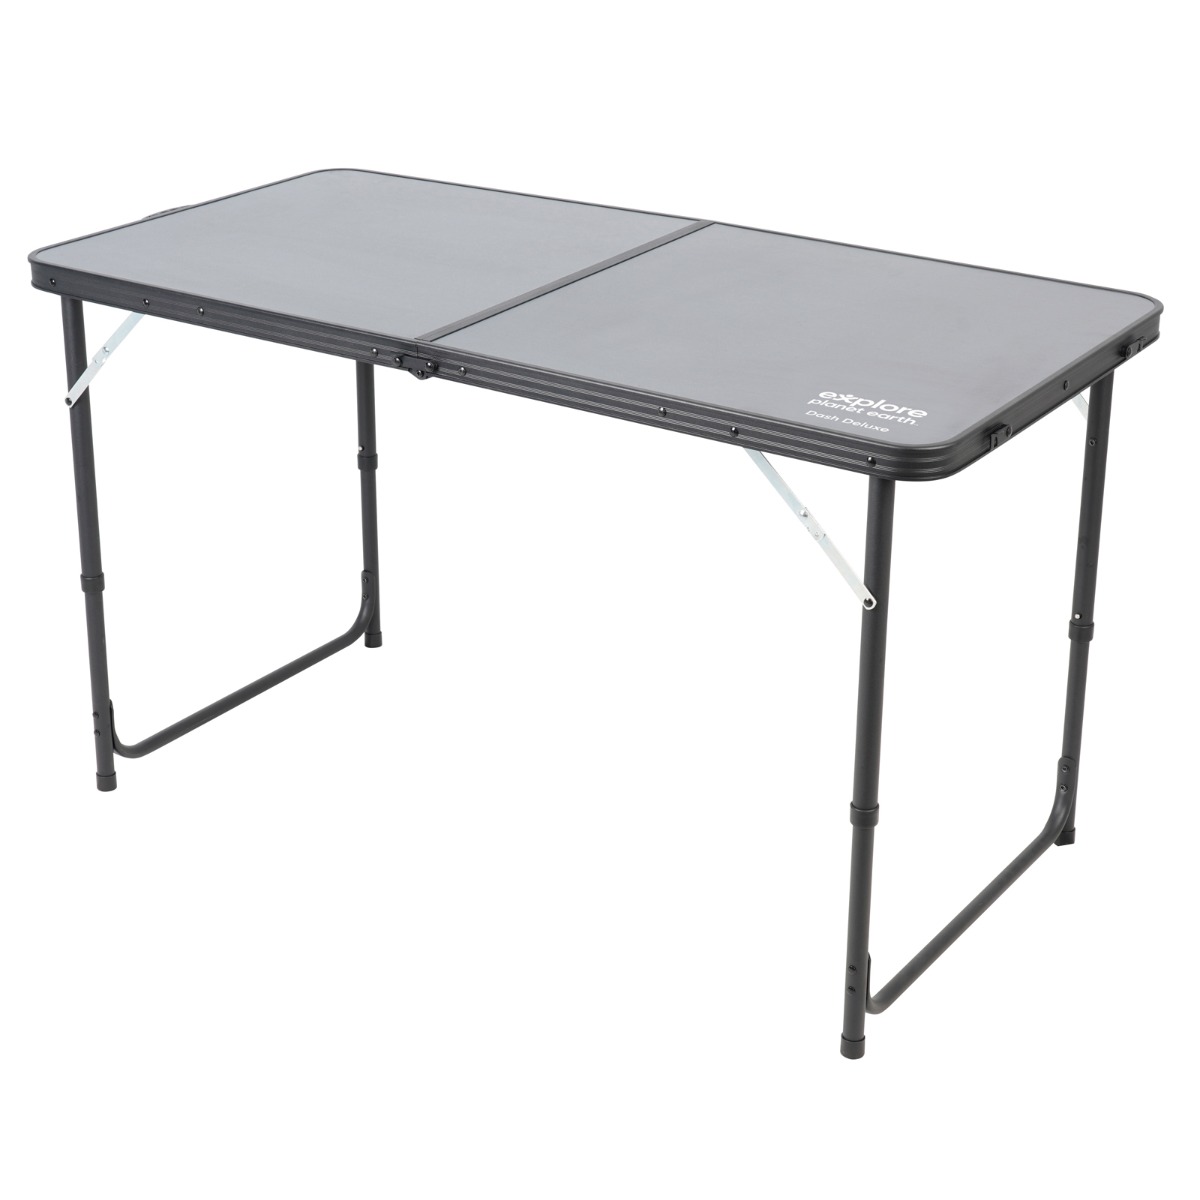 EPE DASH DELUXE TABLE MkII